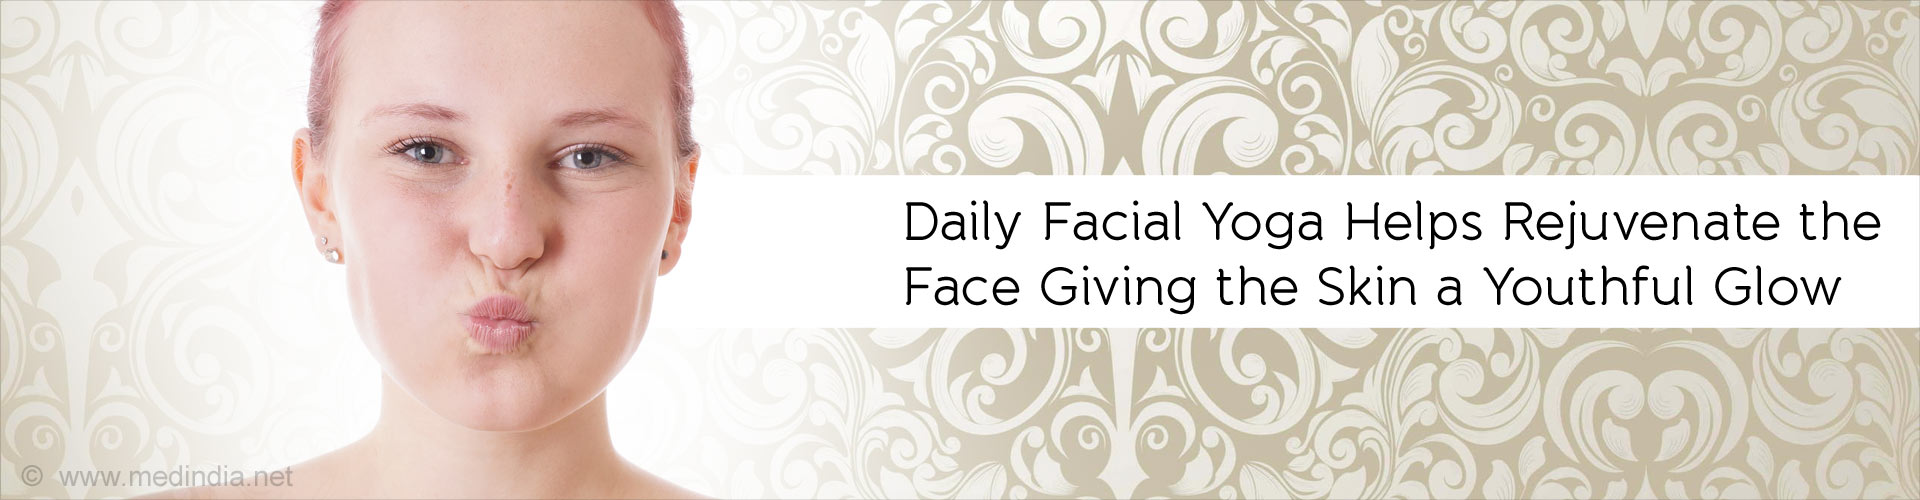 Daily Facial Yoga Helps Rejuvenate the Face Giving the Skin a Youthful Glow